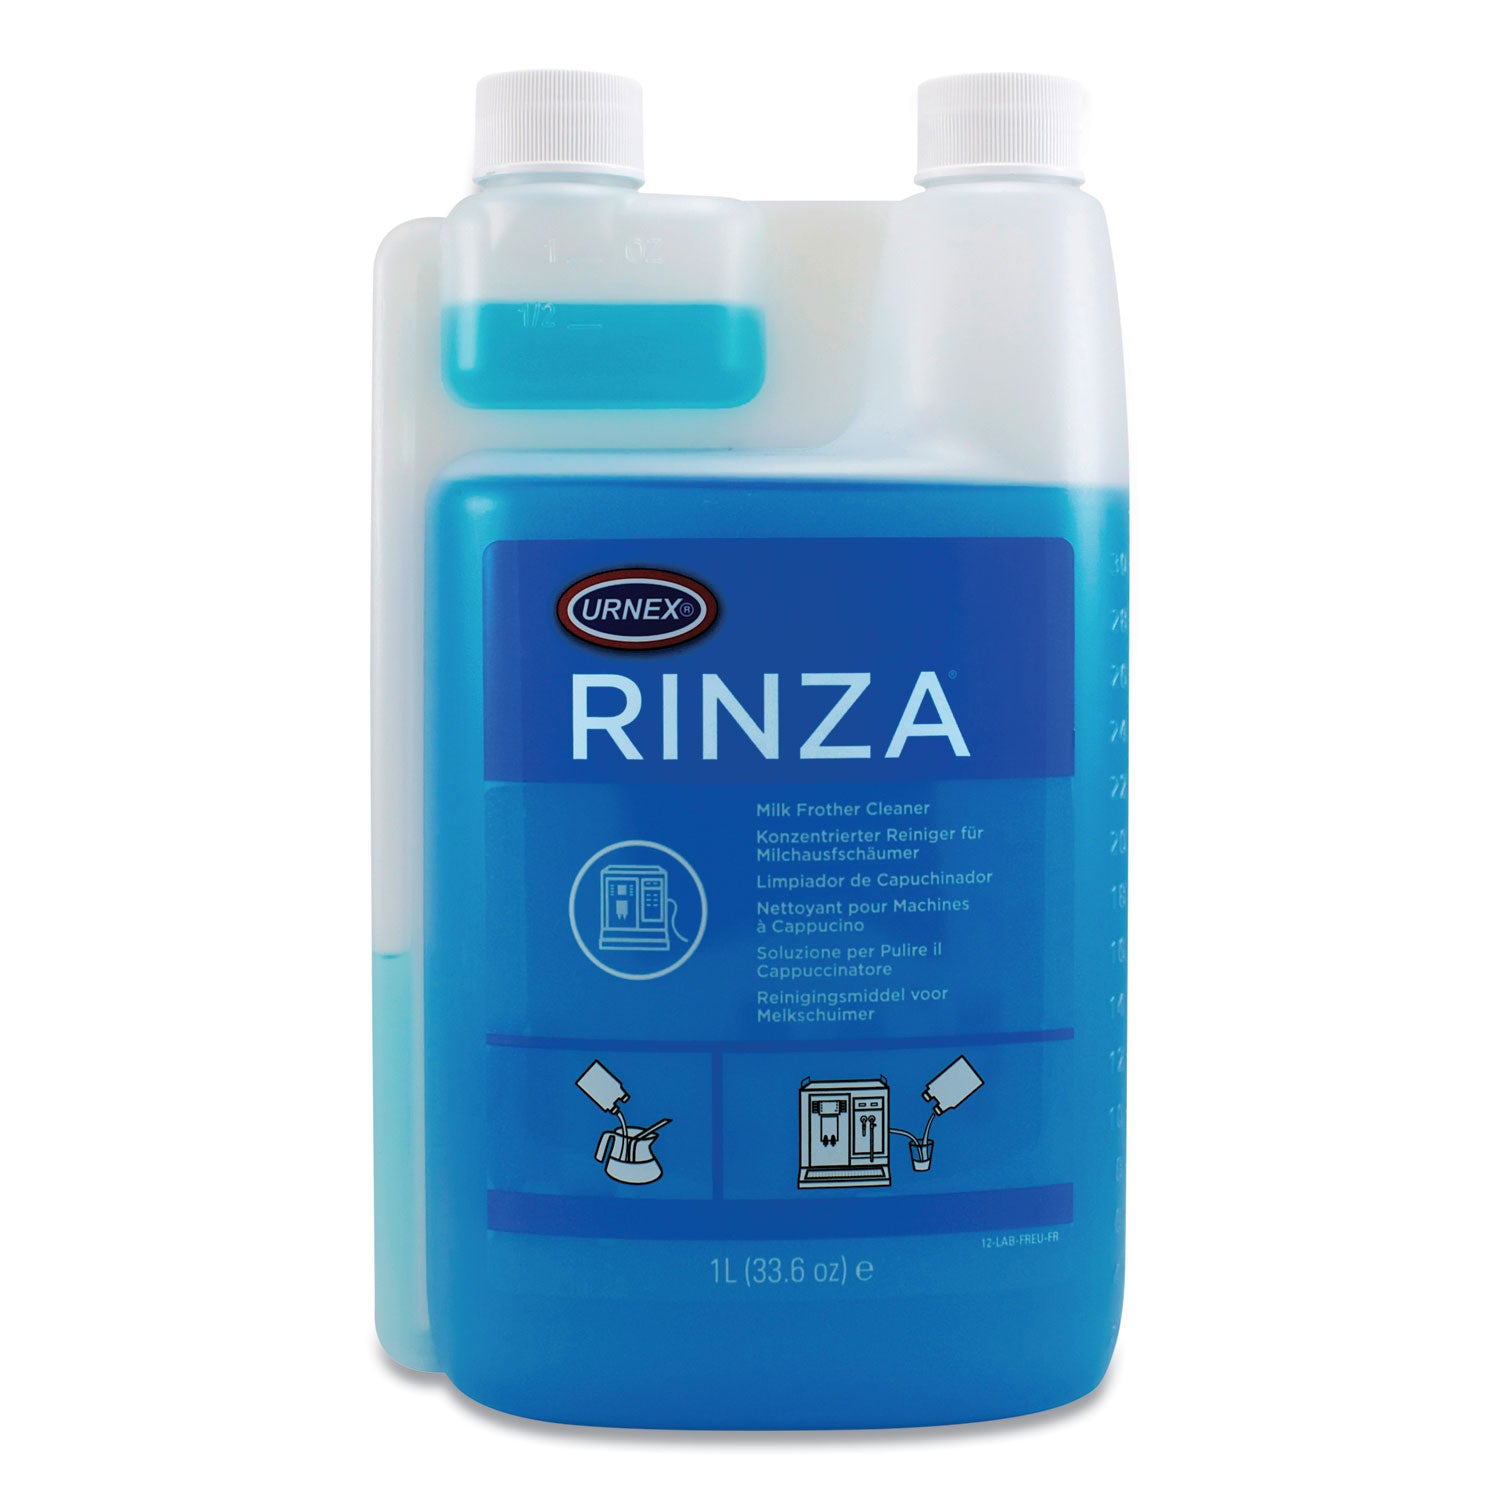 bean-to-cup-brewer-deep-cleaning-kit-4oz-complete-cafe-3-32oz-rinza-12tabz-z61-3-supergrindz-a01-spray-bottle_gmt5000359701 - 3